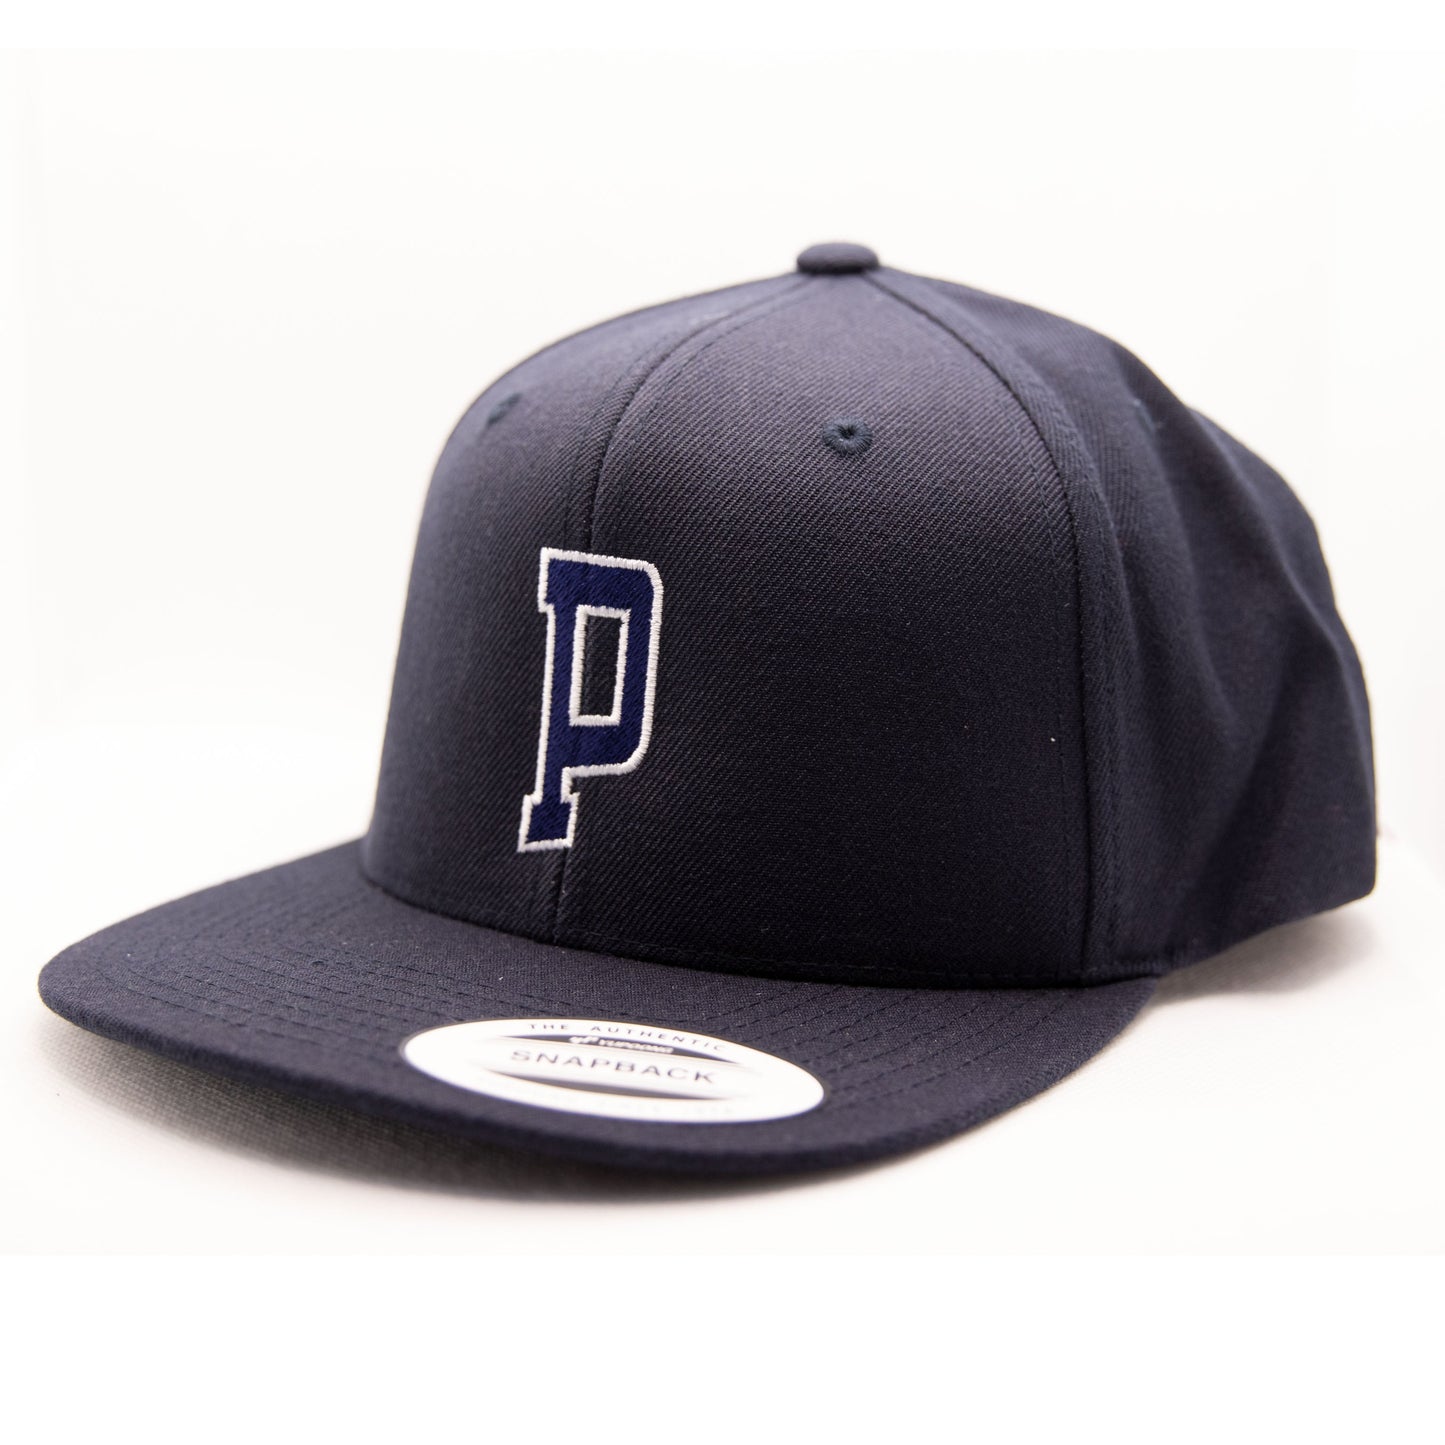 Phantoms Snapback Cap - Blue with White Outline